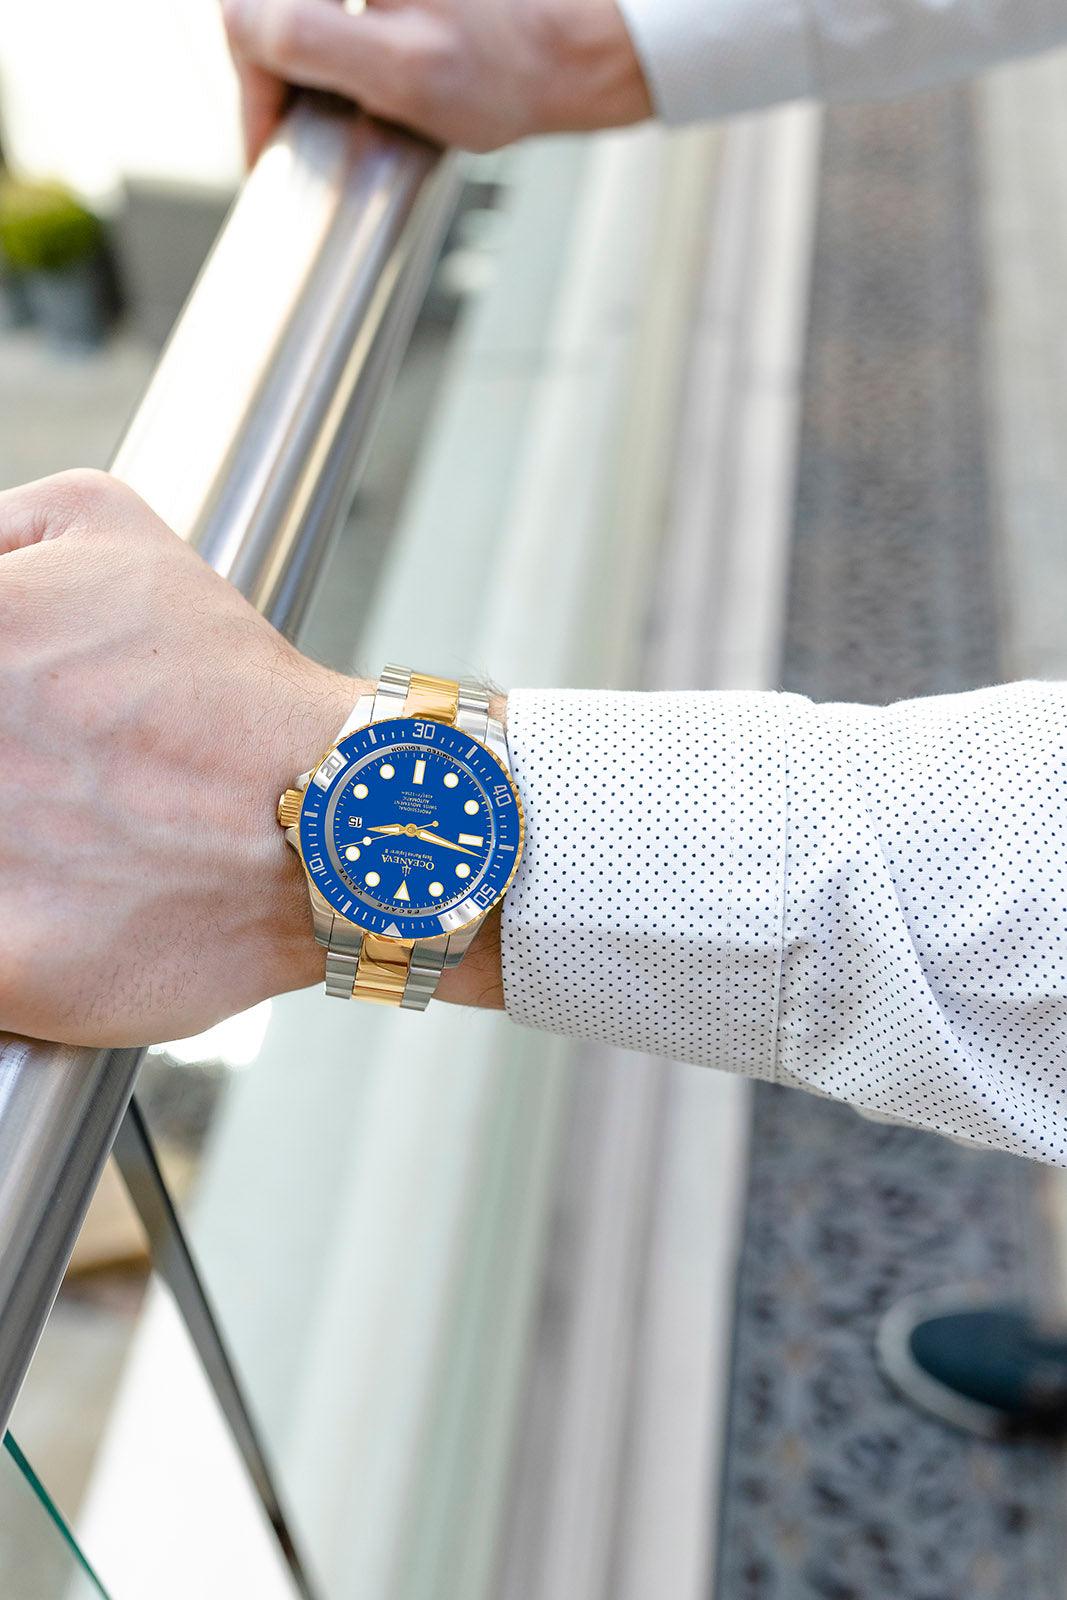 Oceaneva 1250M Dive Watch Blue and Gold On Wrist